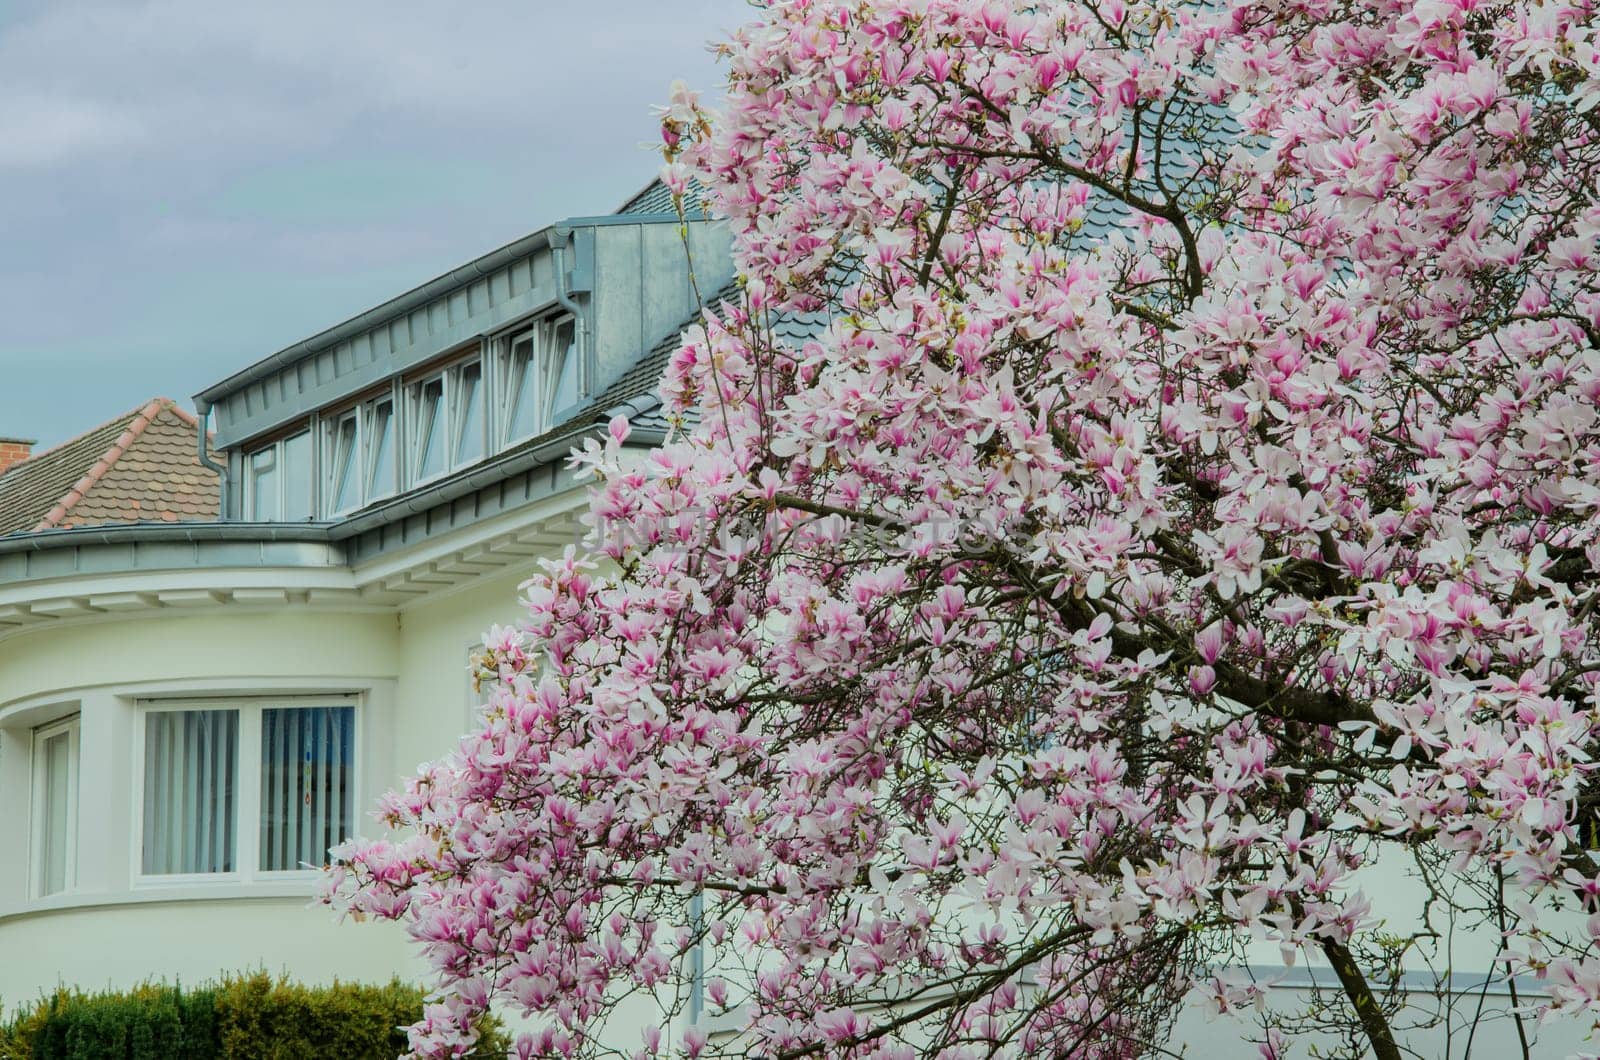 Flowering magnolia tree on the background of white building. Magnificent magnolia flower in full bloom, flooded with soft light of an overcast day.